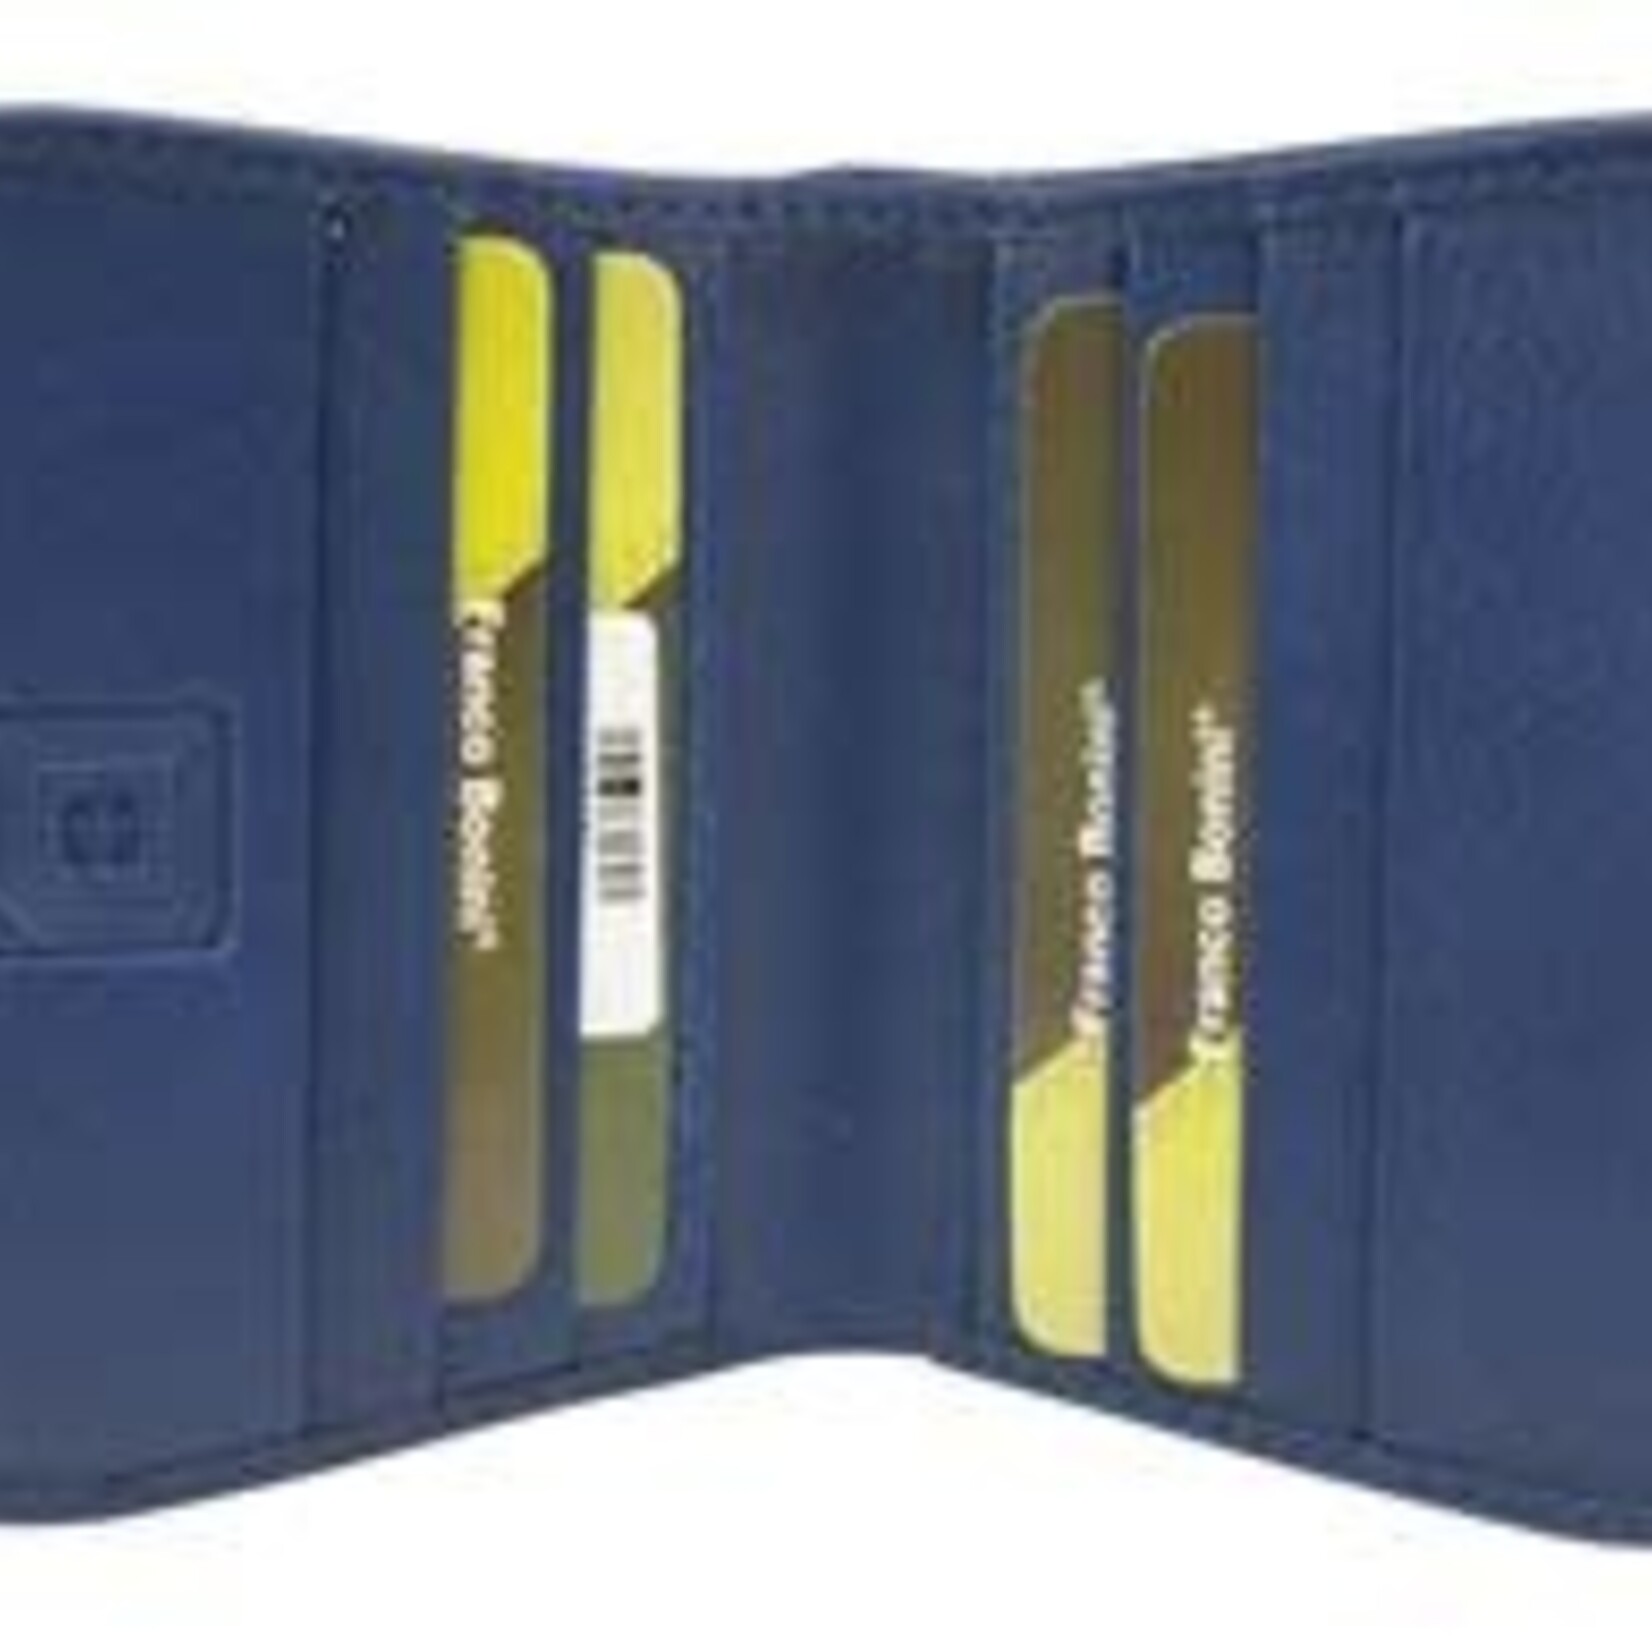 Franco Bonini leather 11 x 15cm wallet with RFID protection | And here's  the more substantial 11 x 15cm wallet with RFID protection - $79.95.  #WestleighPharmacy #FrancoBonini | By Westleigh PharmacyFacebook